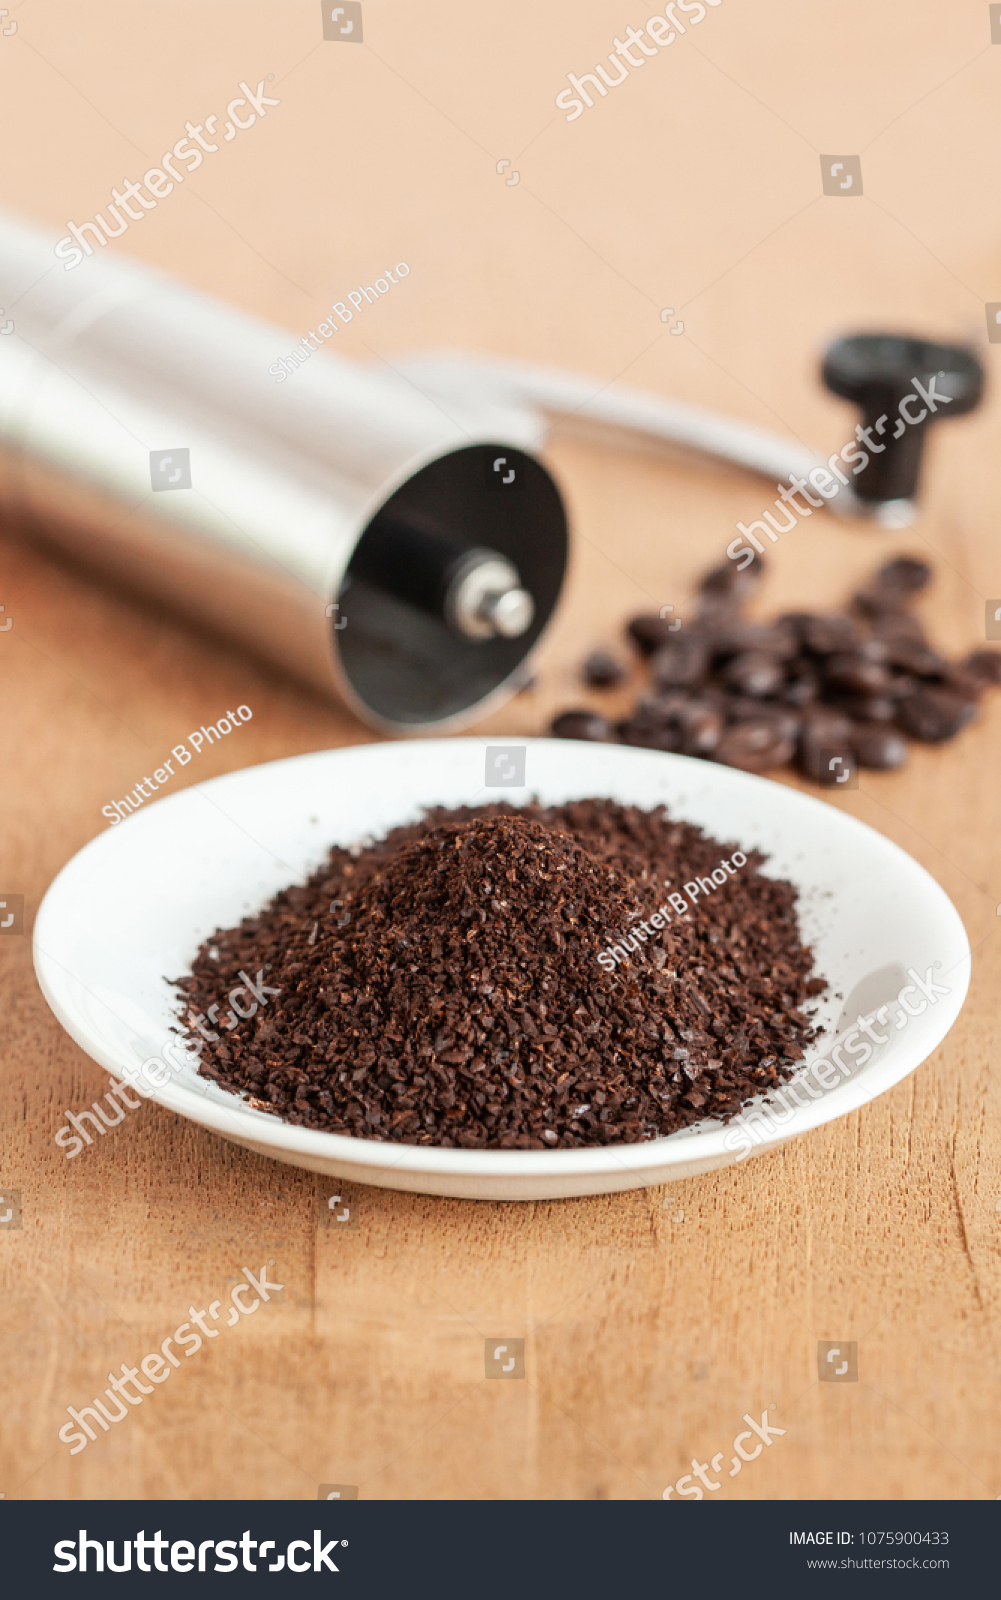 Coffee powder in white dish on wood table. #1075900433